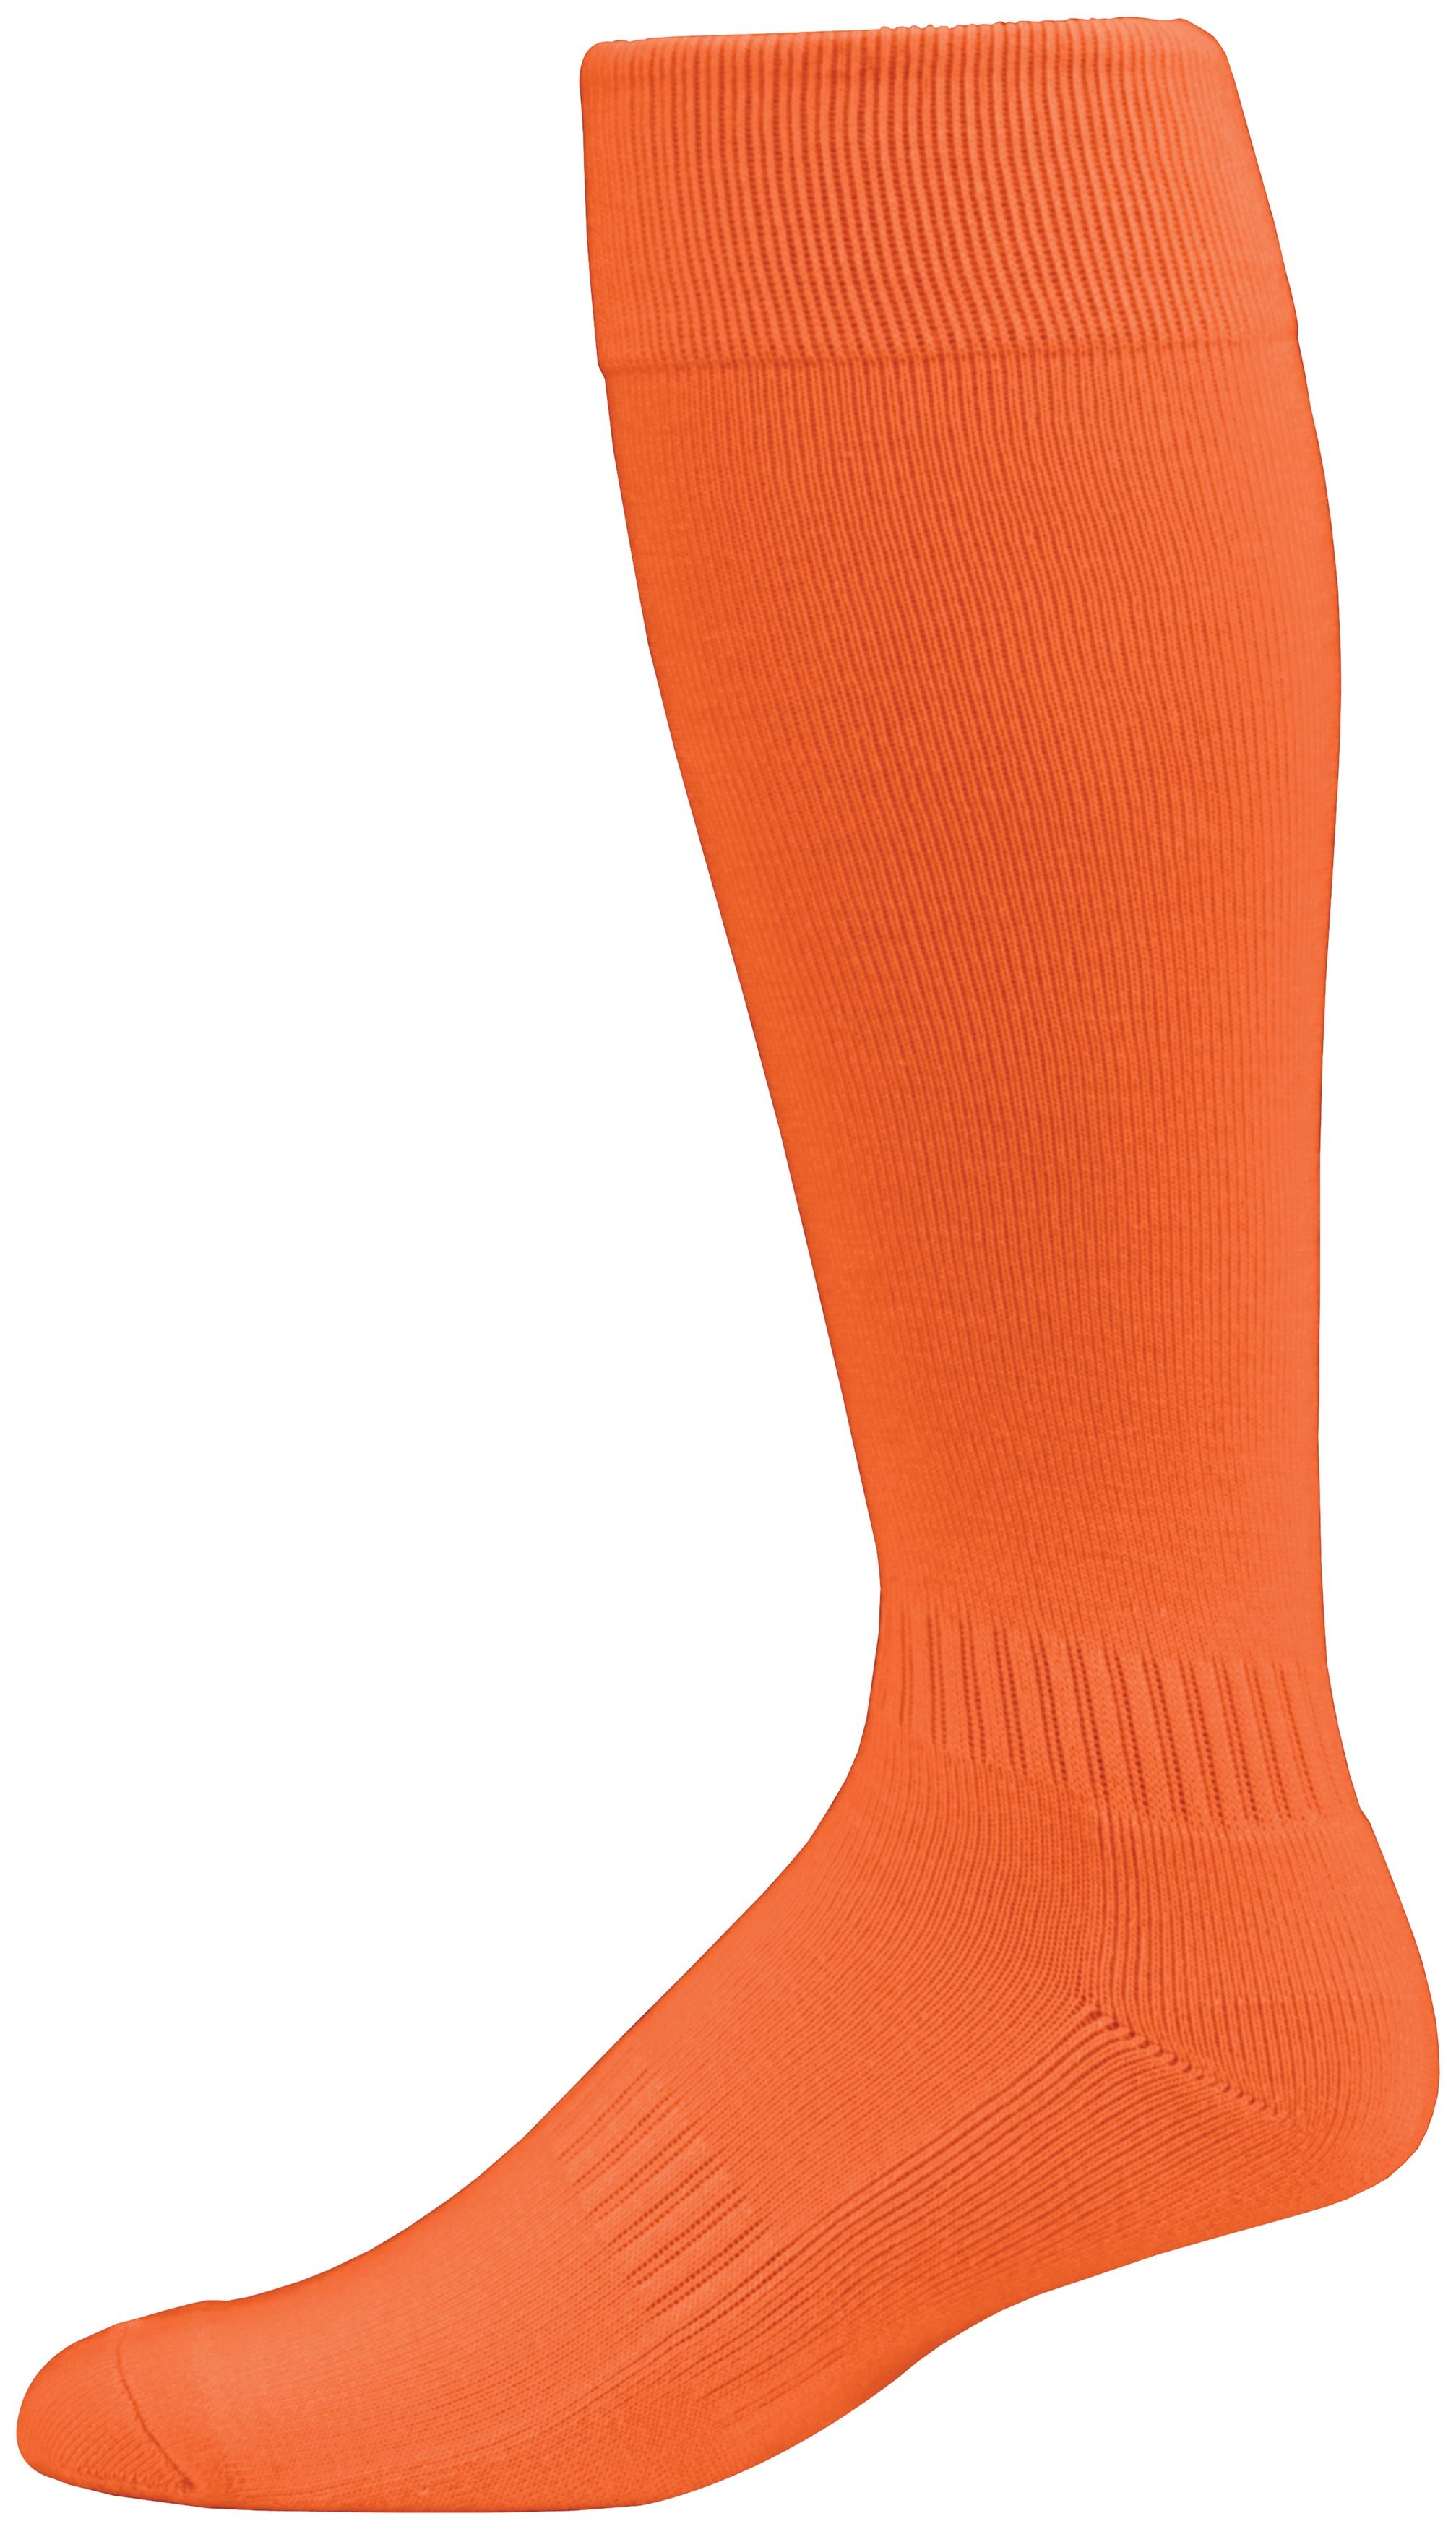 Augusta Sportswear Elite Multi-Sport Sock in Orange  -Part of the Accessories, Augusta-Products, Accessories-Socks product lines at KanaleyCreations.com